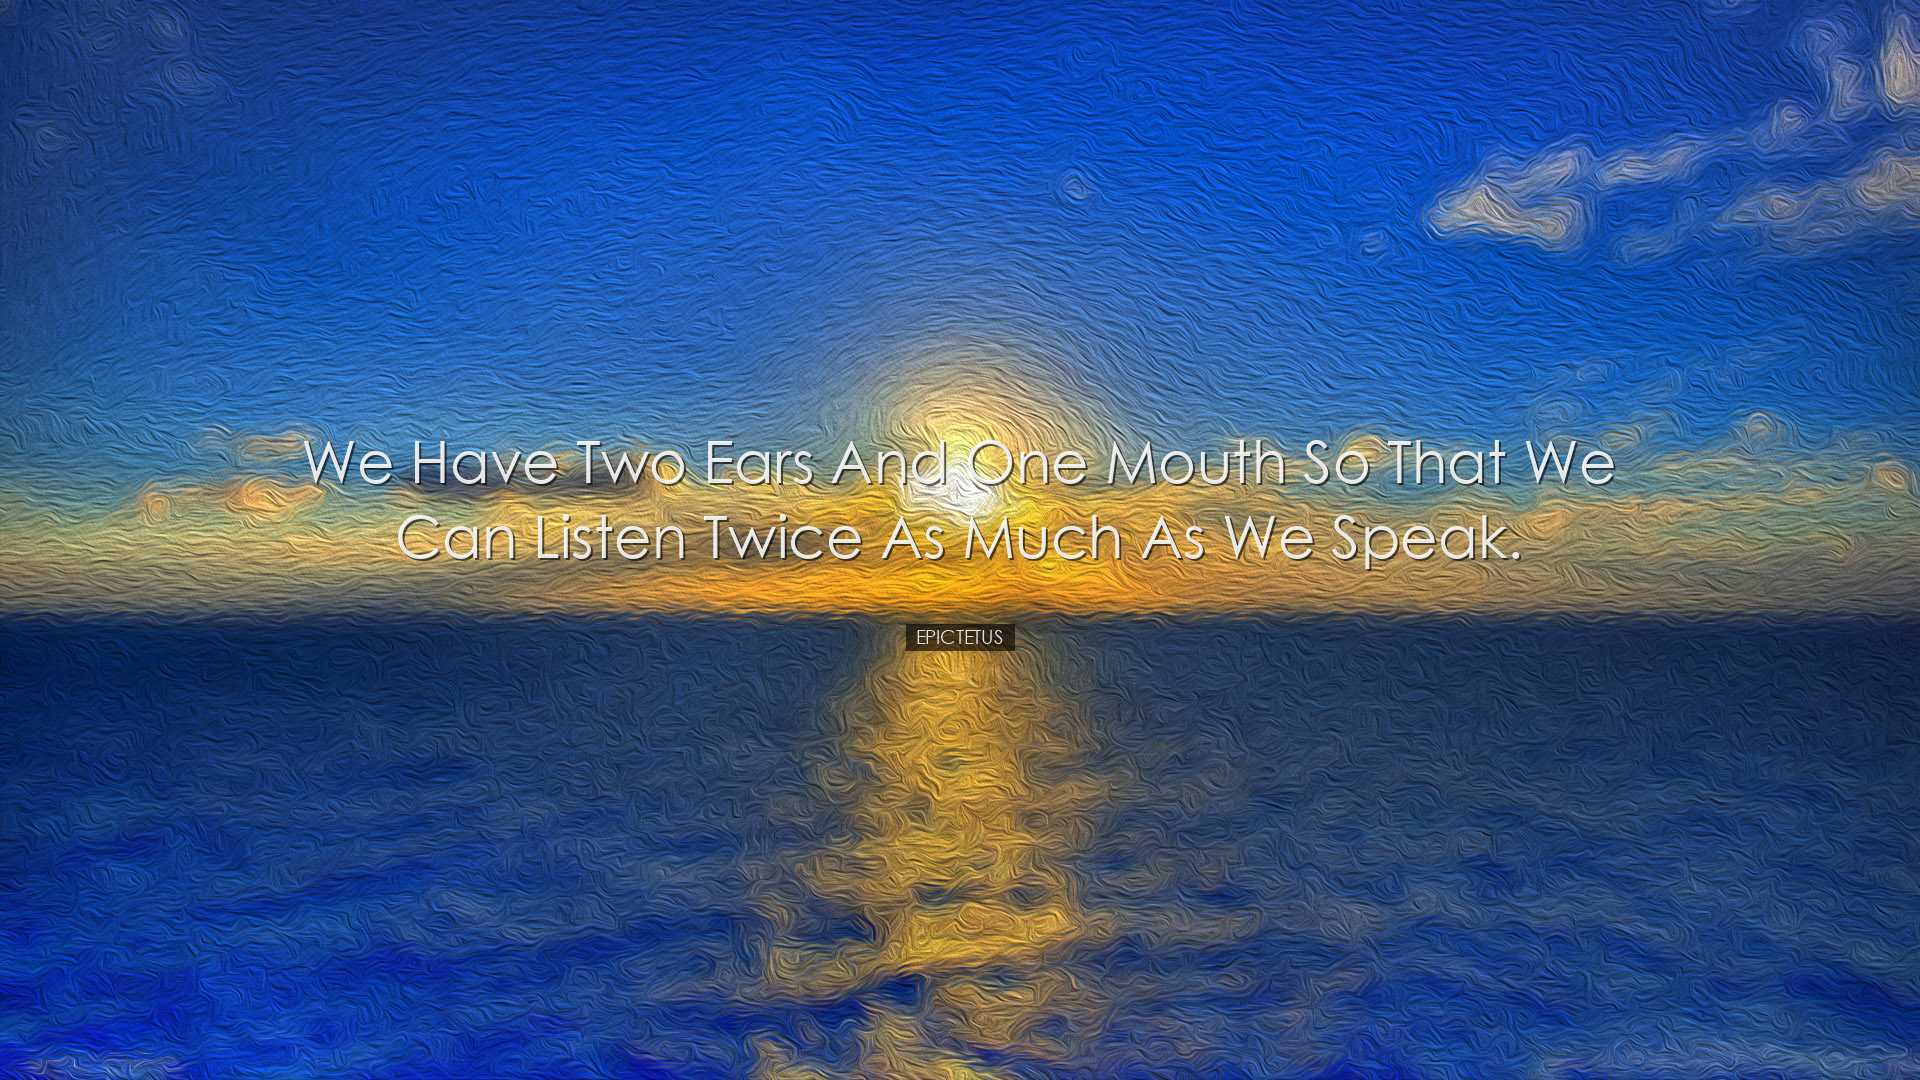 We have two ears and one mouth so that we can listen twice as much